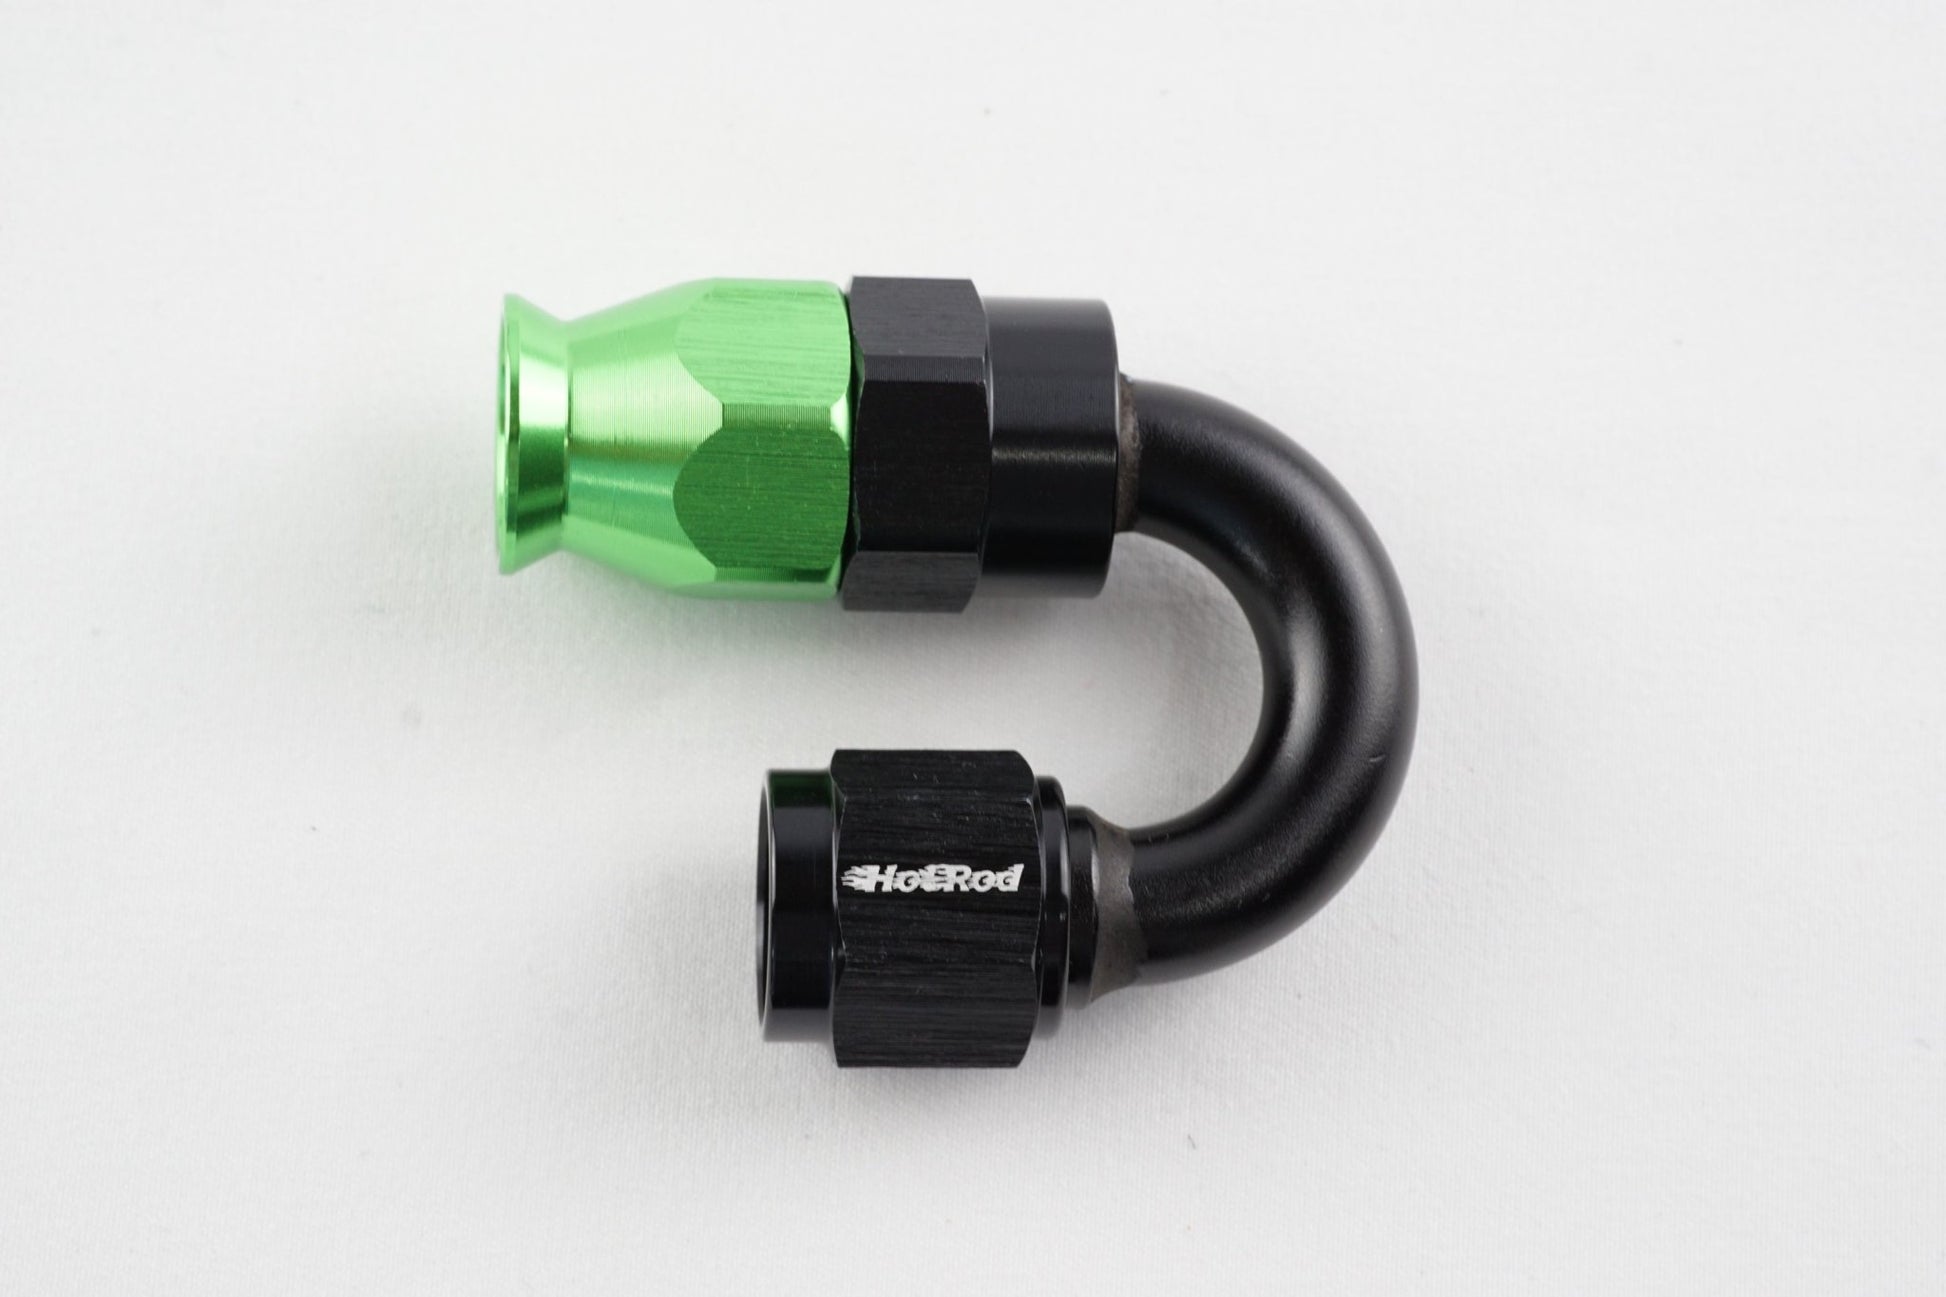 Reusable 180 degree PTFE swivel hose end - AN6, AN8 - Hot Rod fuel hose by One Guy Garage